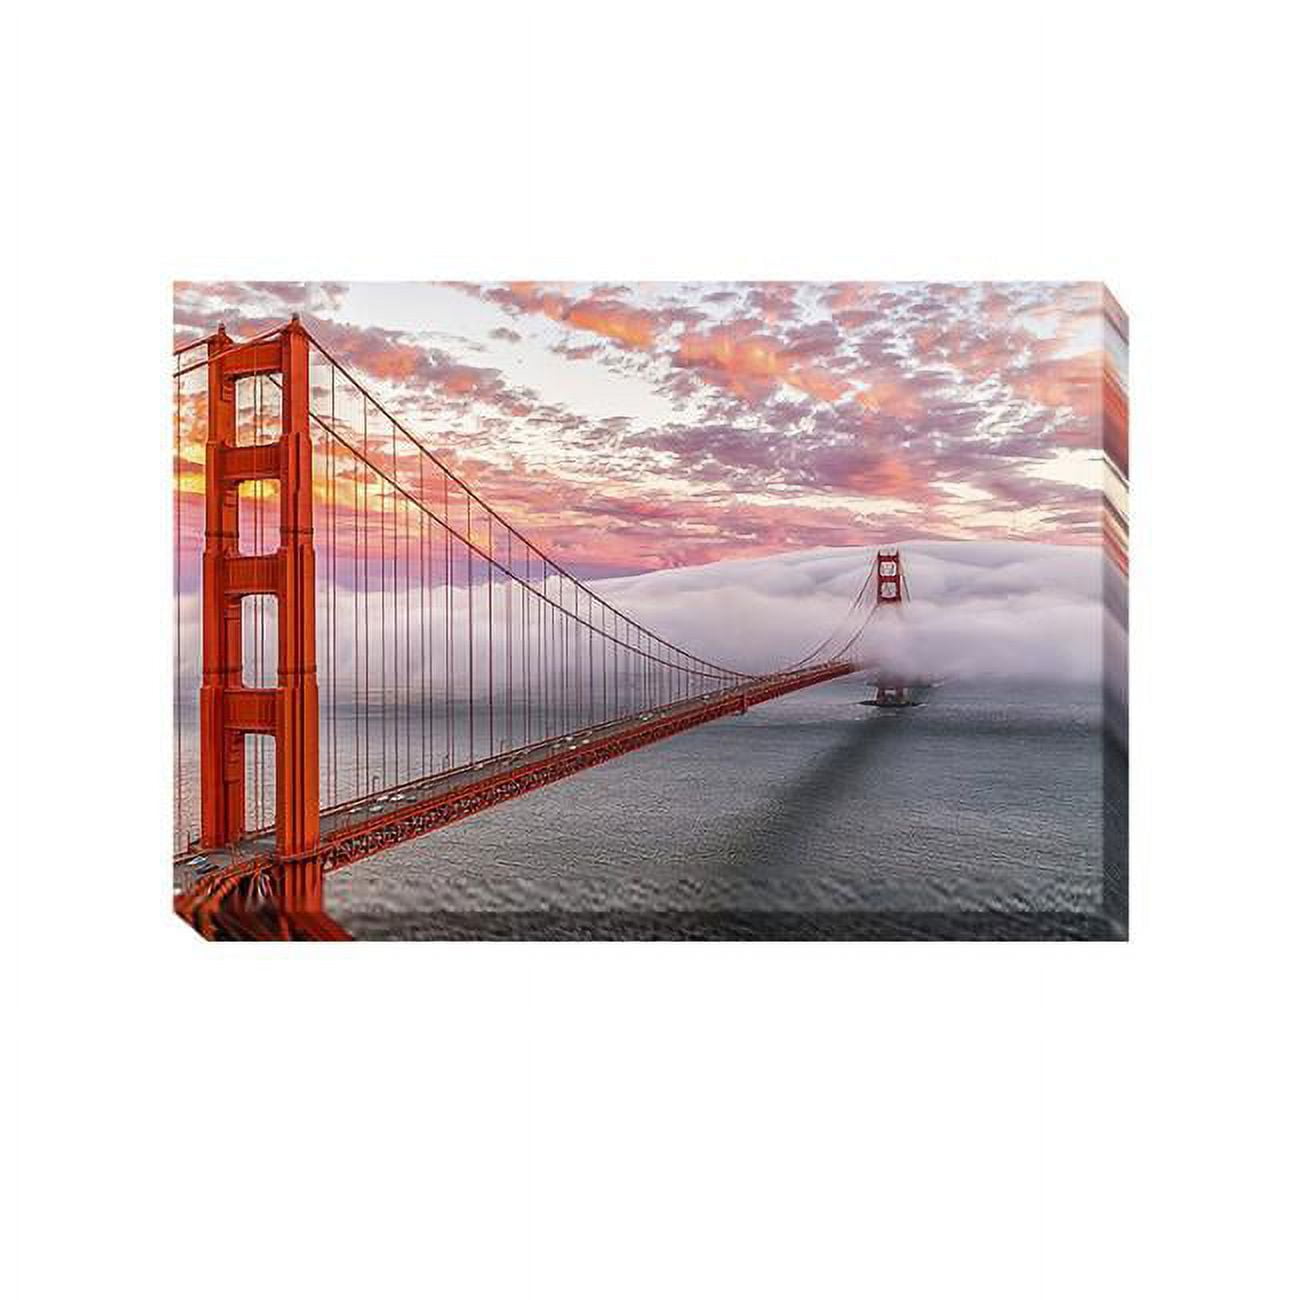 1624g277ig Evening Commute By Dave Gordon Custom Gallery-wrapped Canvas Giclee Art - 16 X 24 X 1.5 In.